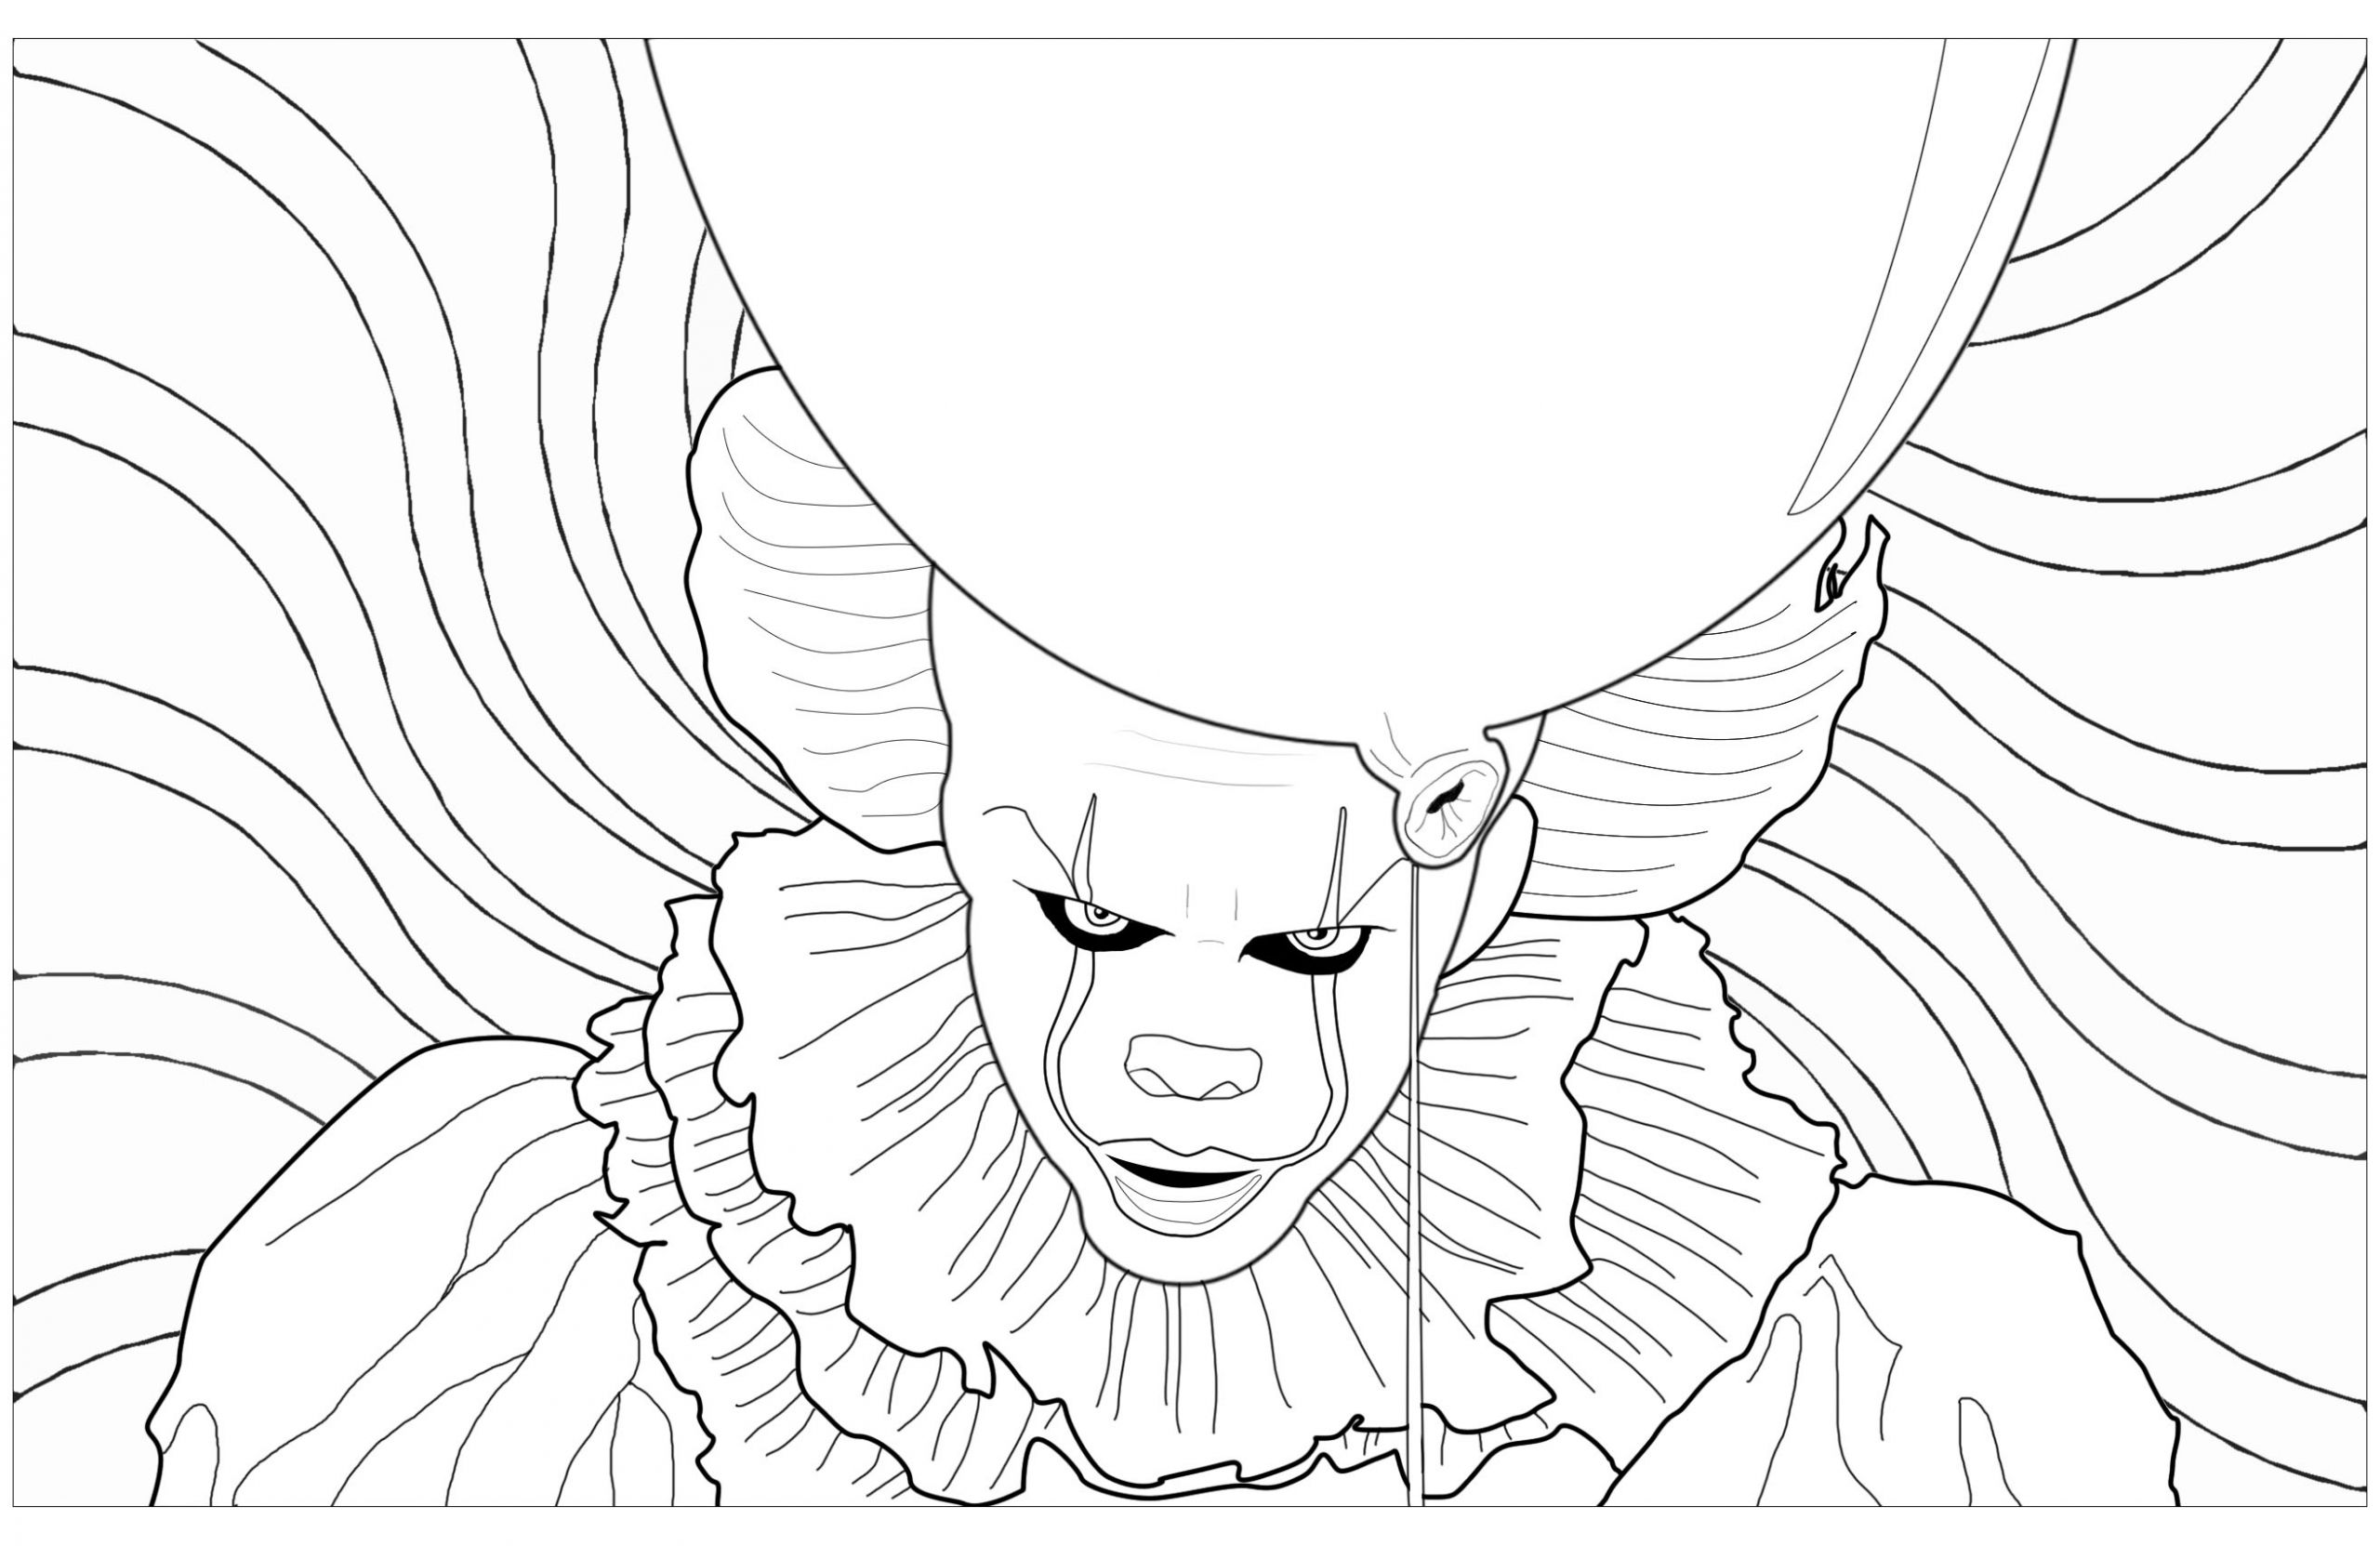 image=coloriages halloween coloriage halloween clown ca grippe sous 1